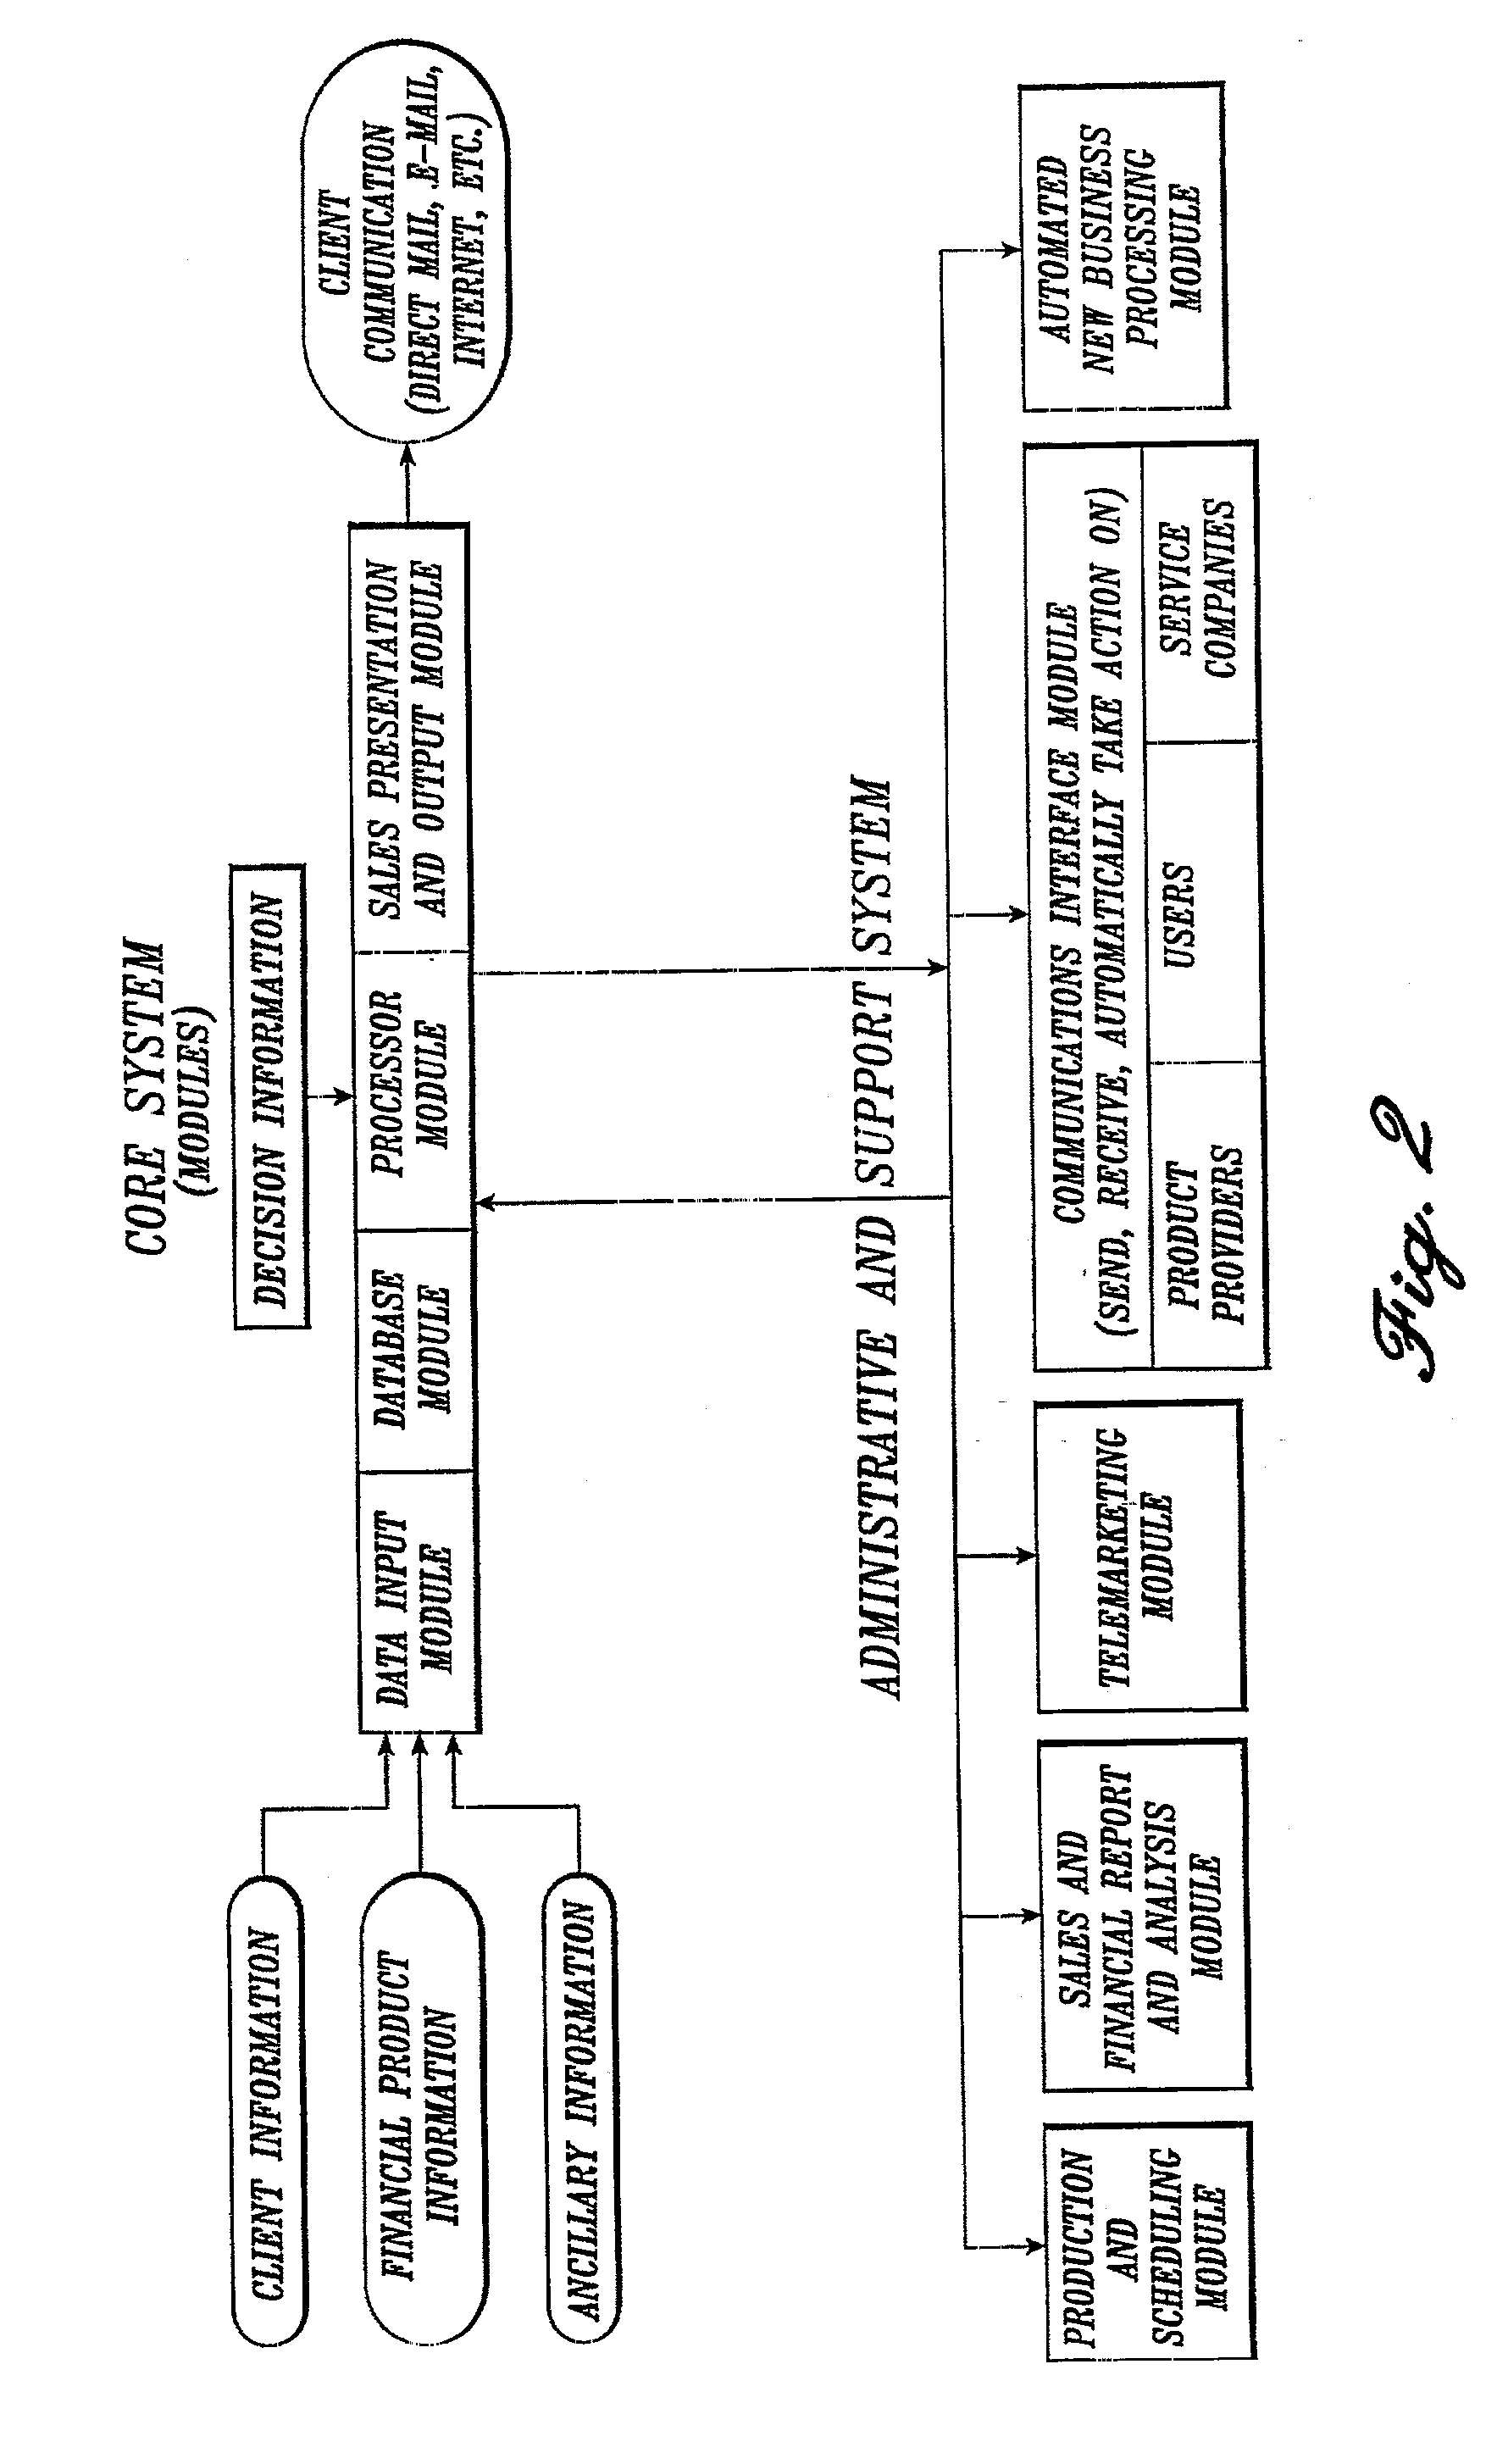 Personalized communication documents, system and method for preparing same